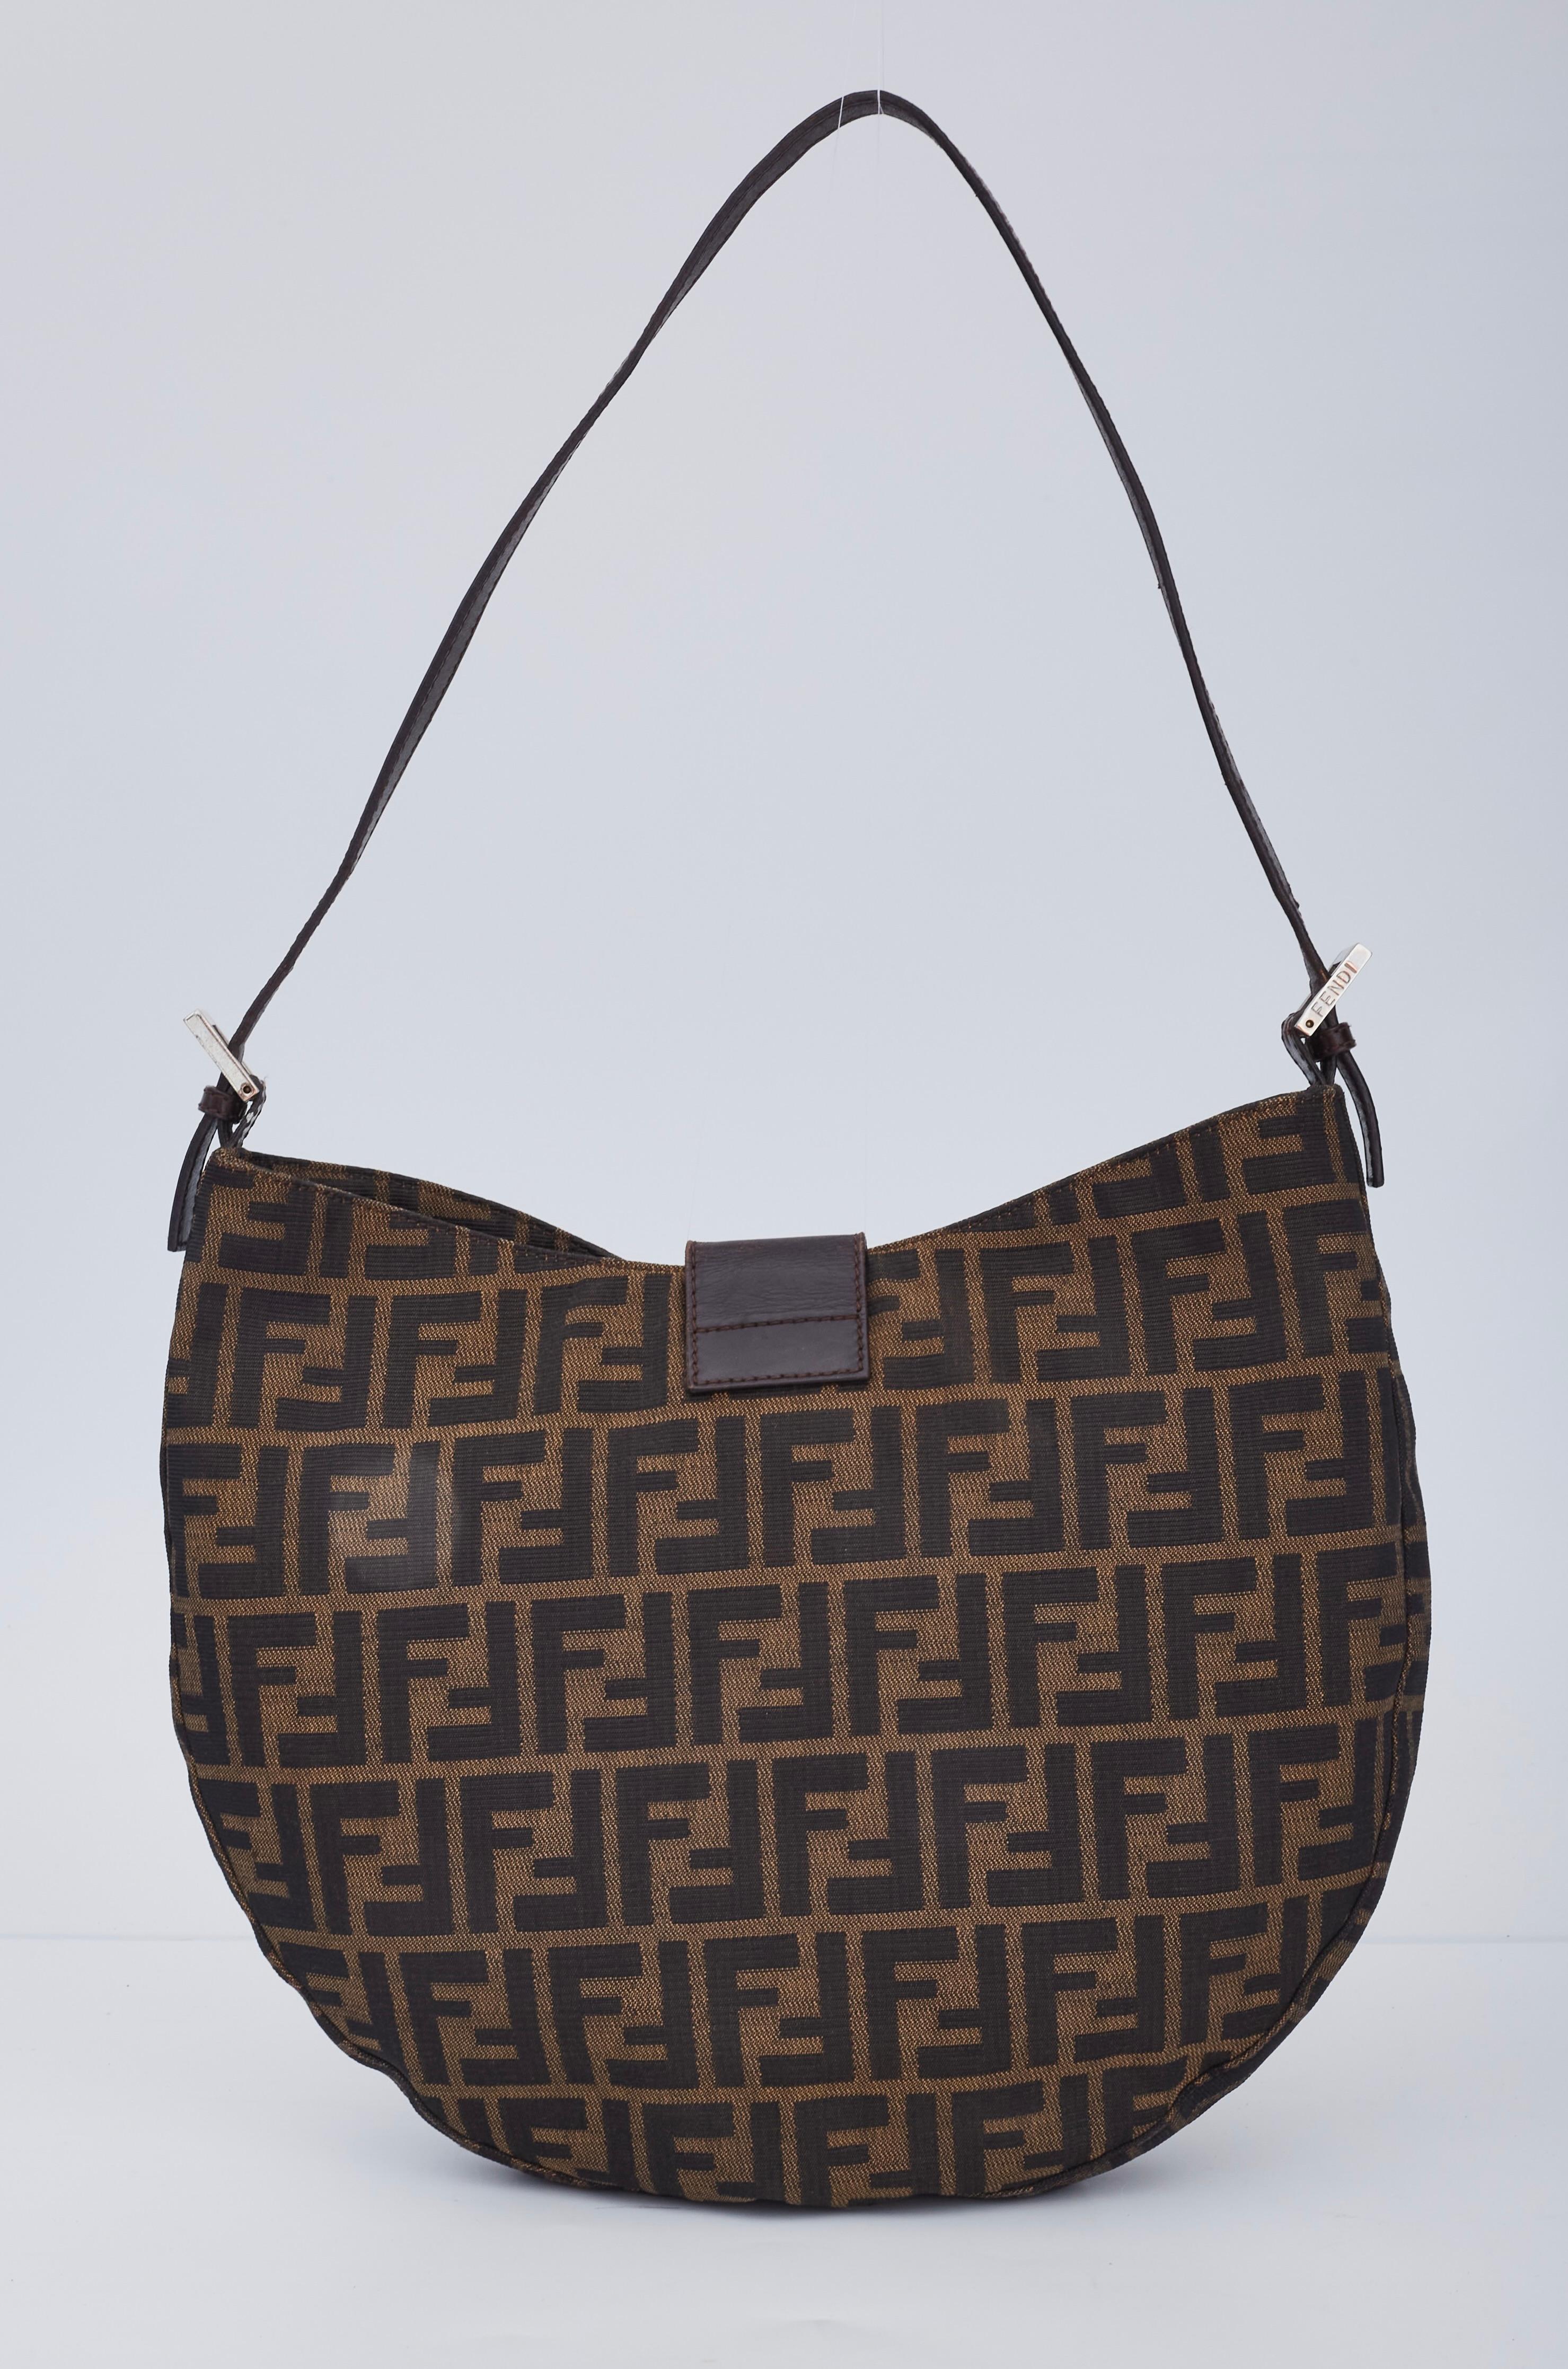 This vintage crescent shaped bag is made with zucca logo fabric and features a flat leather shoulder strap, an open top, a leather strap flap at top secured with snap for closure and brown fabric interior with a patch pocket.

COLOR: Fendi monogram